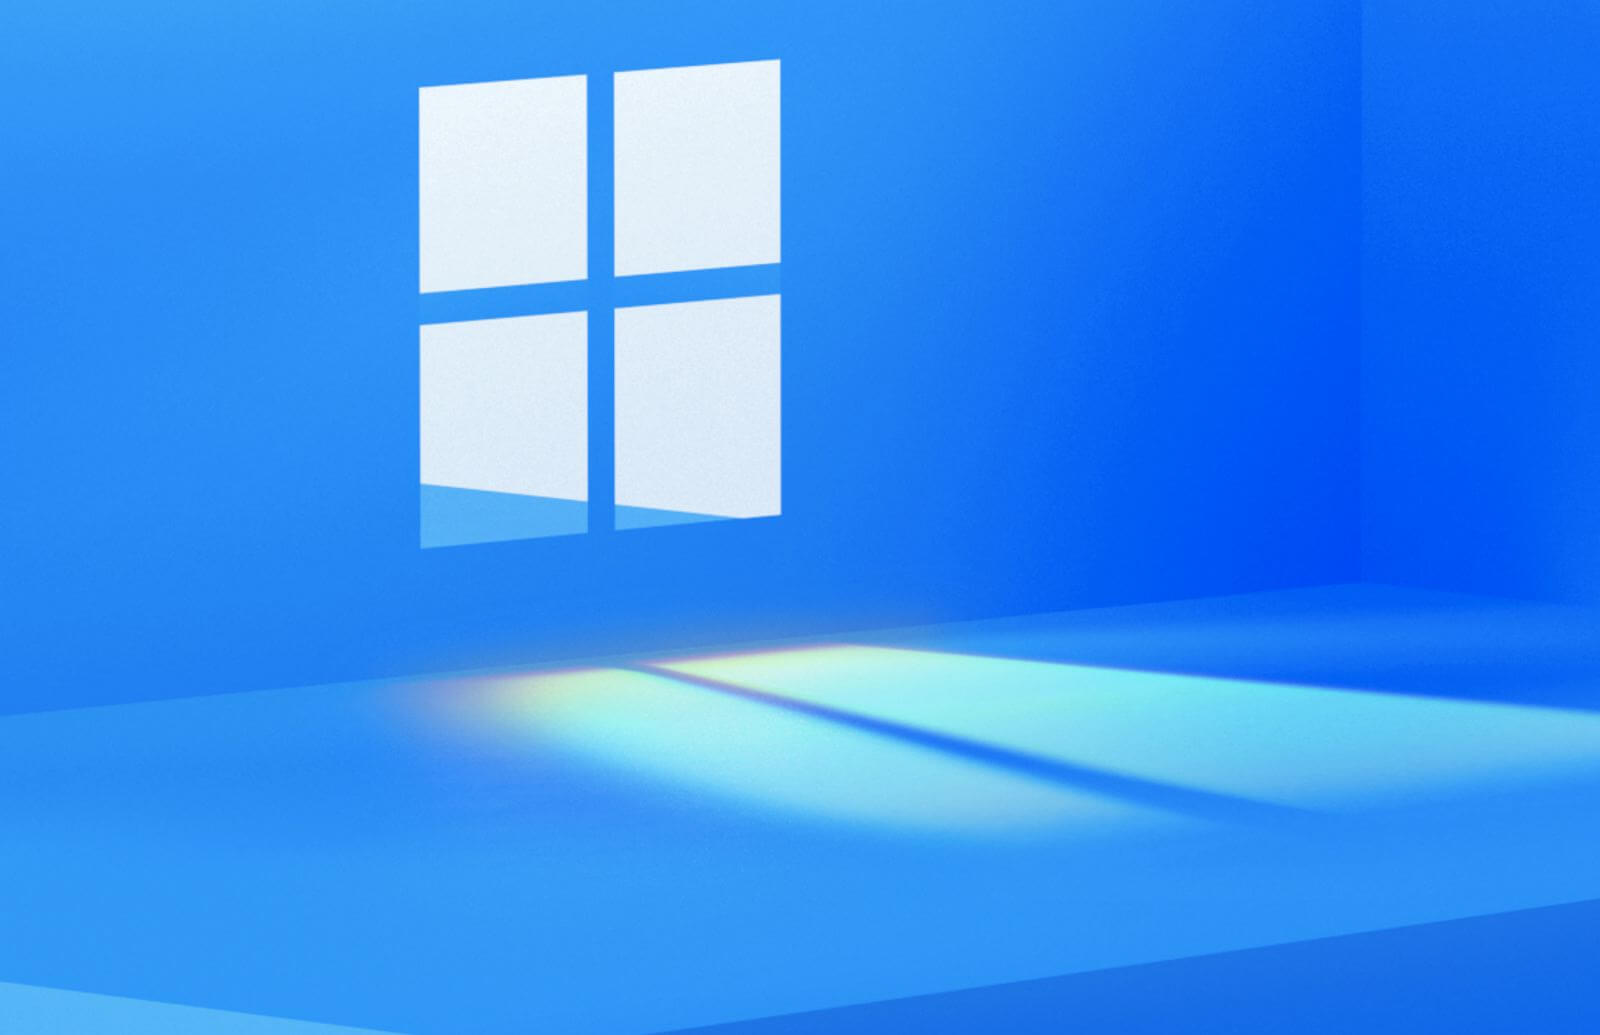 Download Windows 10 Wallpapers (4K) Just Released by Microsoft